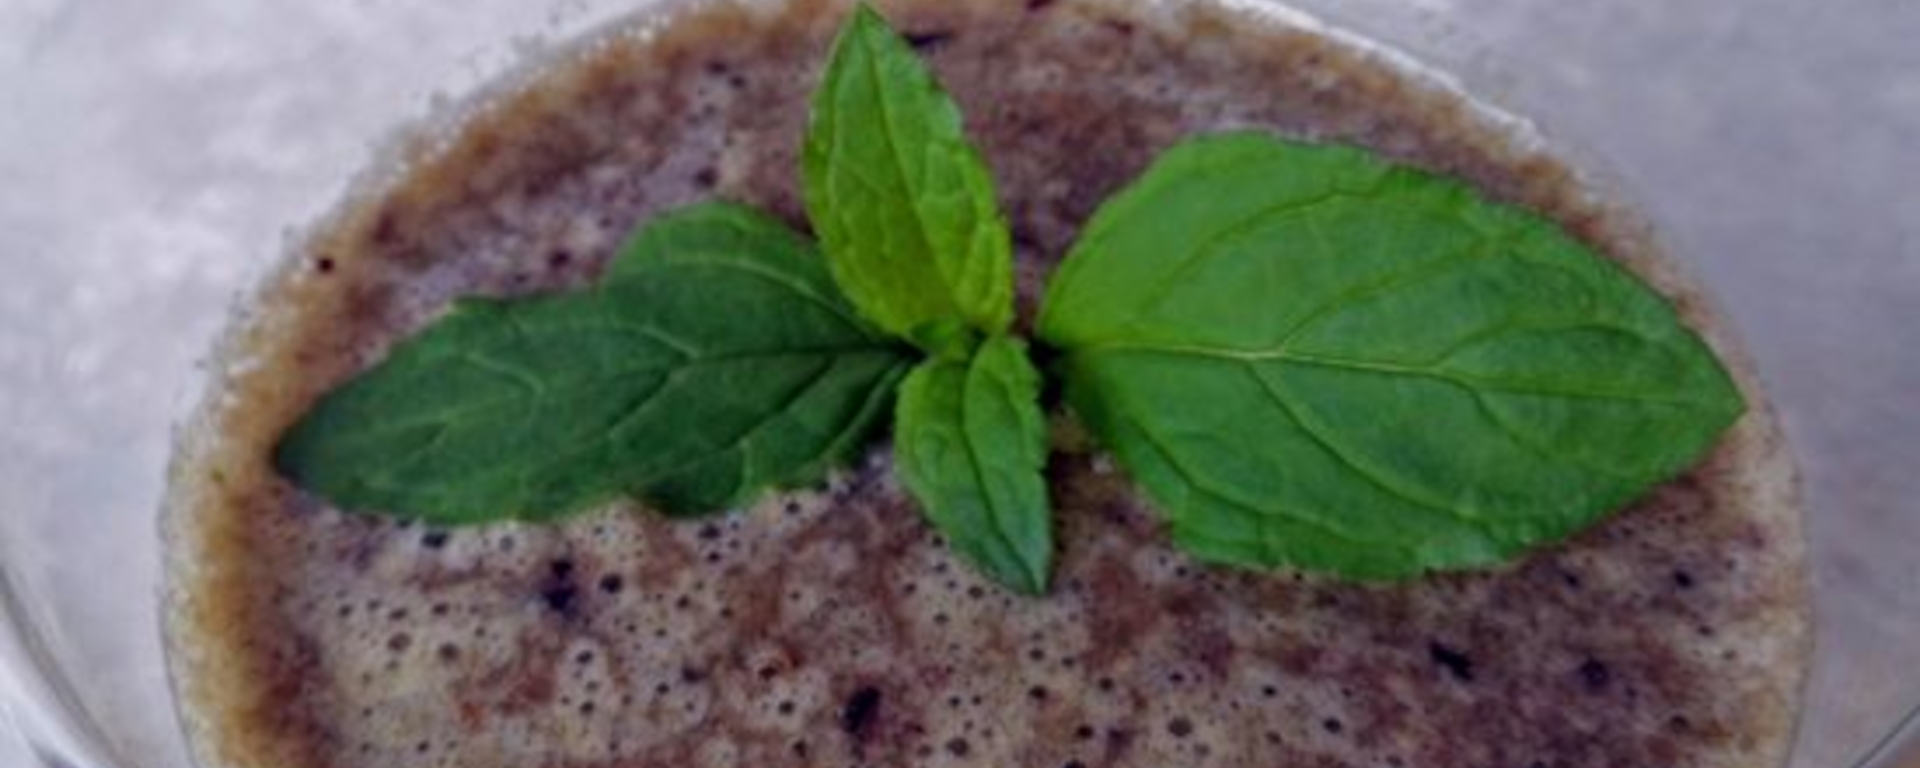 LuvMyRecipe.com - Baby Spinach, Blueberry and Wheatgrass Smoothie Featured